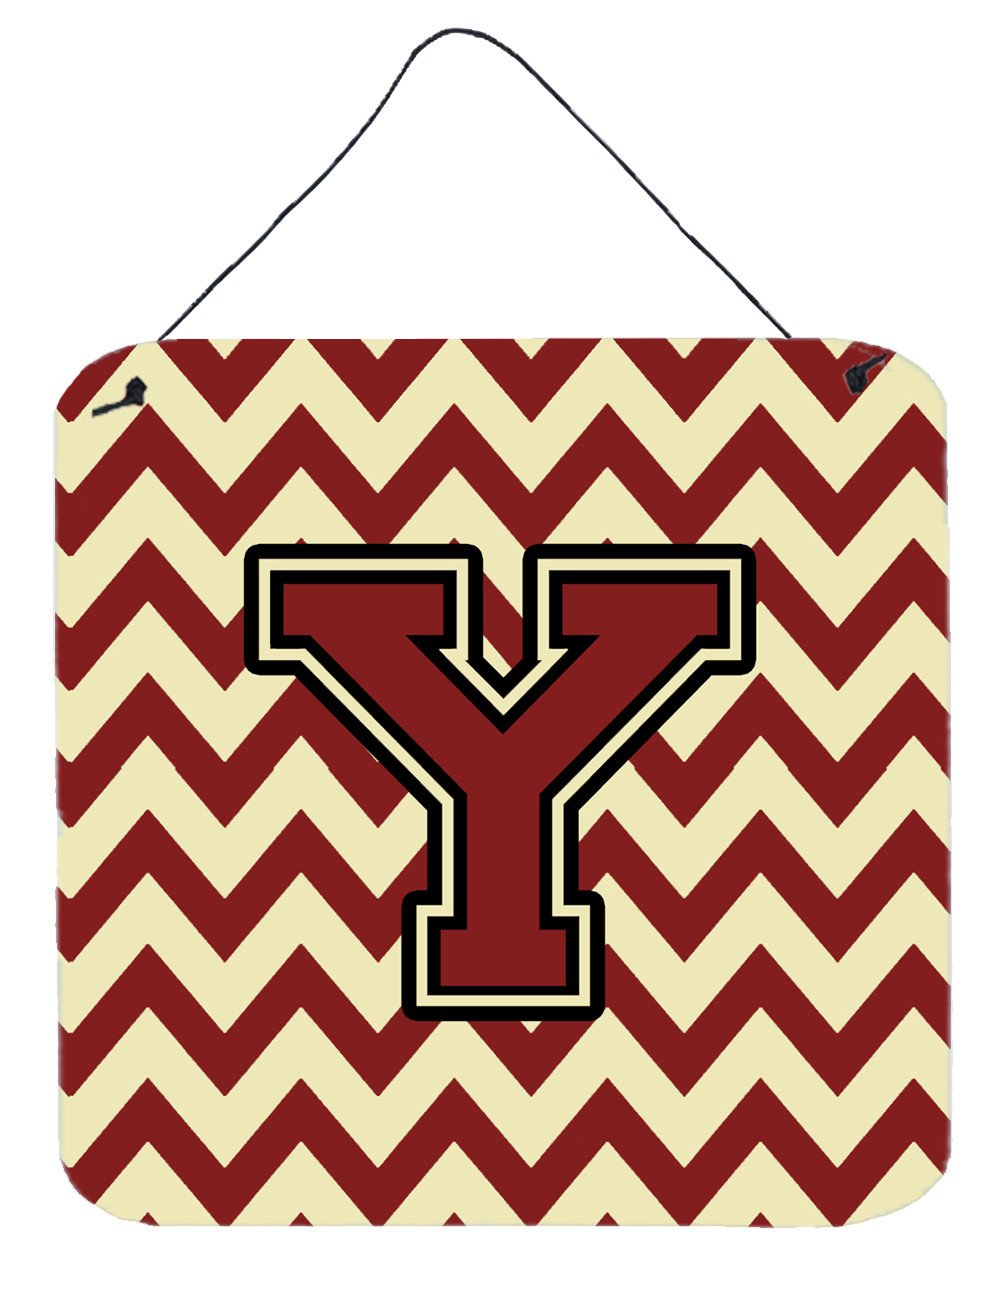 Letter Y Chevron Maroon and Gold Wall or Door Hanging Prints CJ1061-YDS66 by Caroline's Treasures